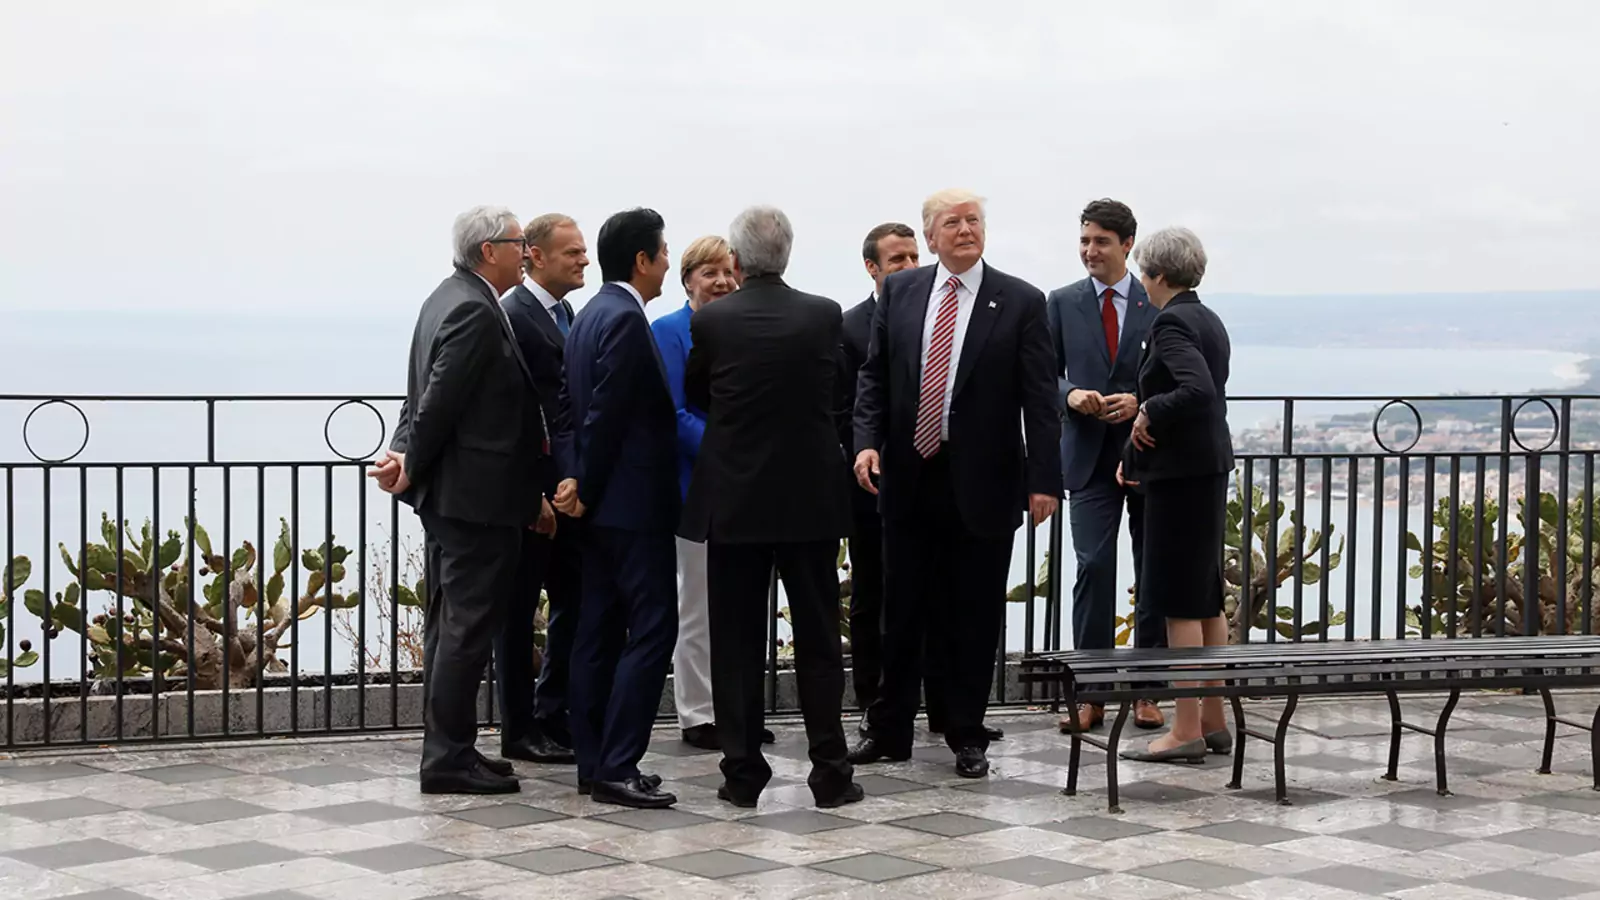 President Trump gathers with leaders of the Group of Seven in Taormina, Italy.